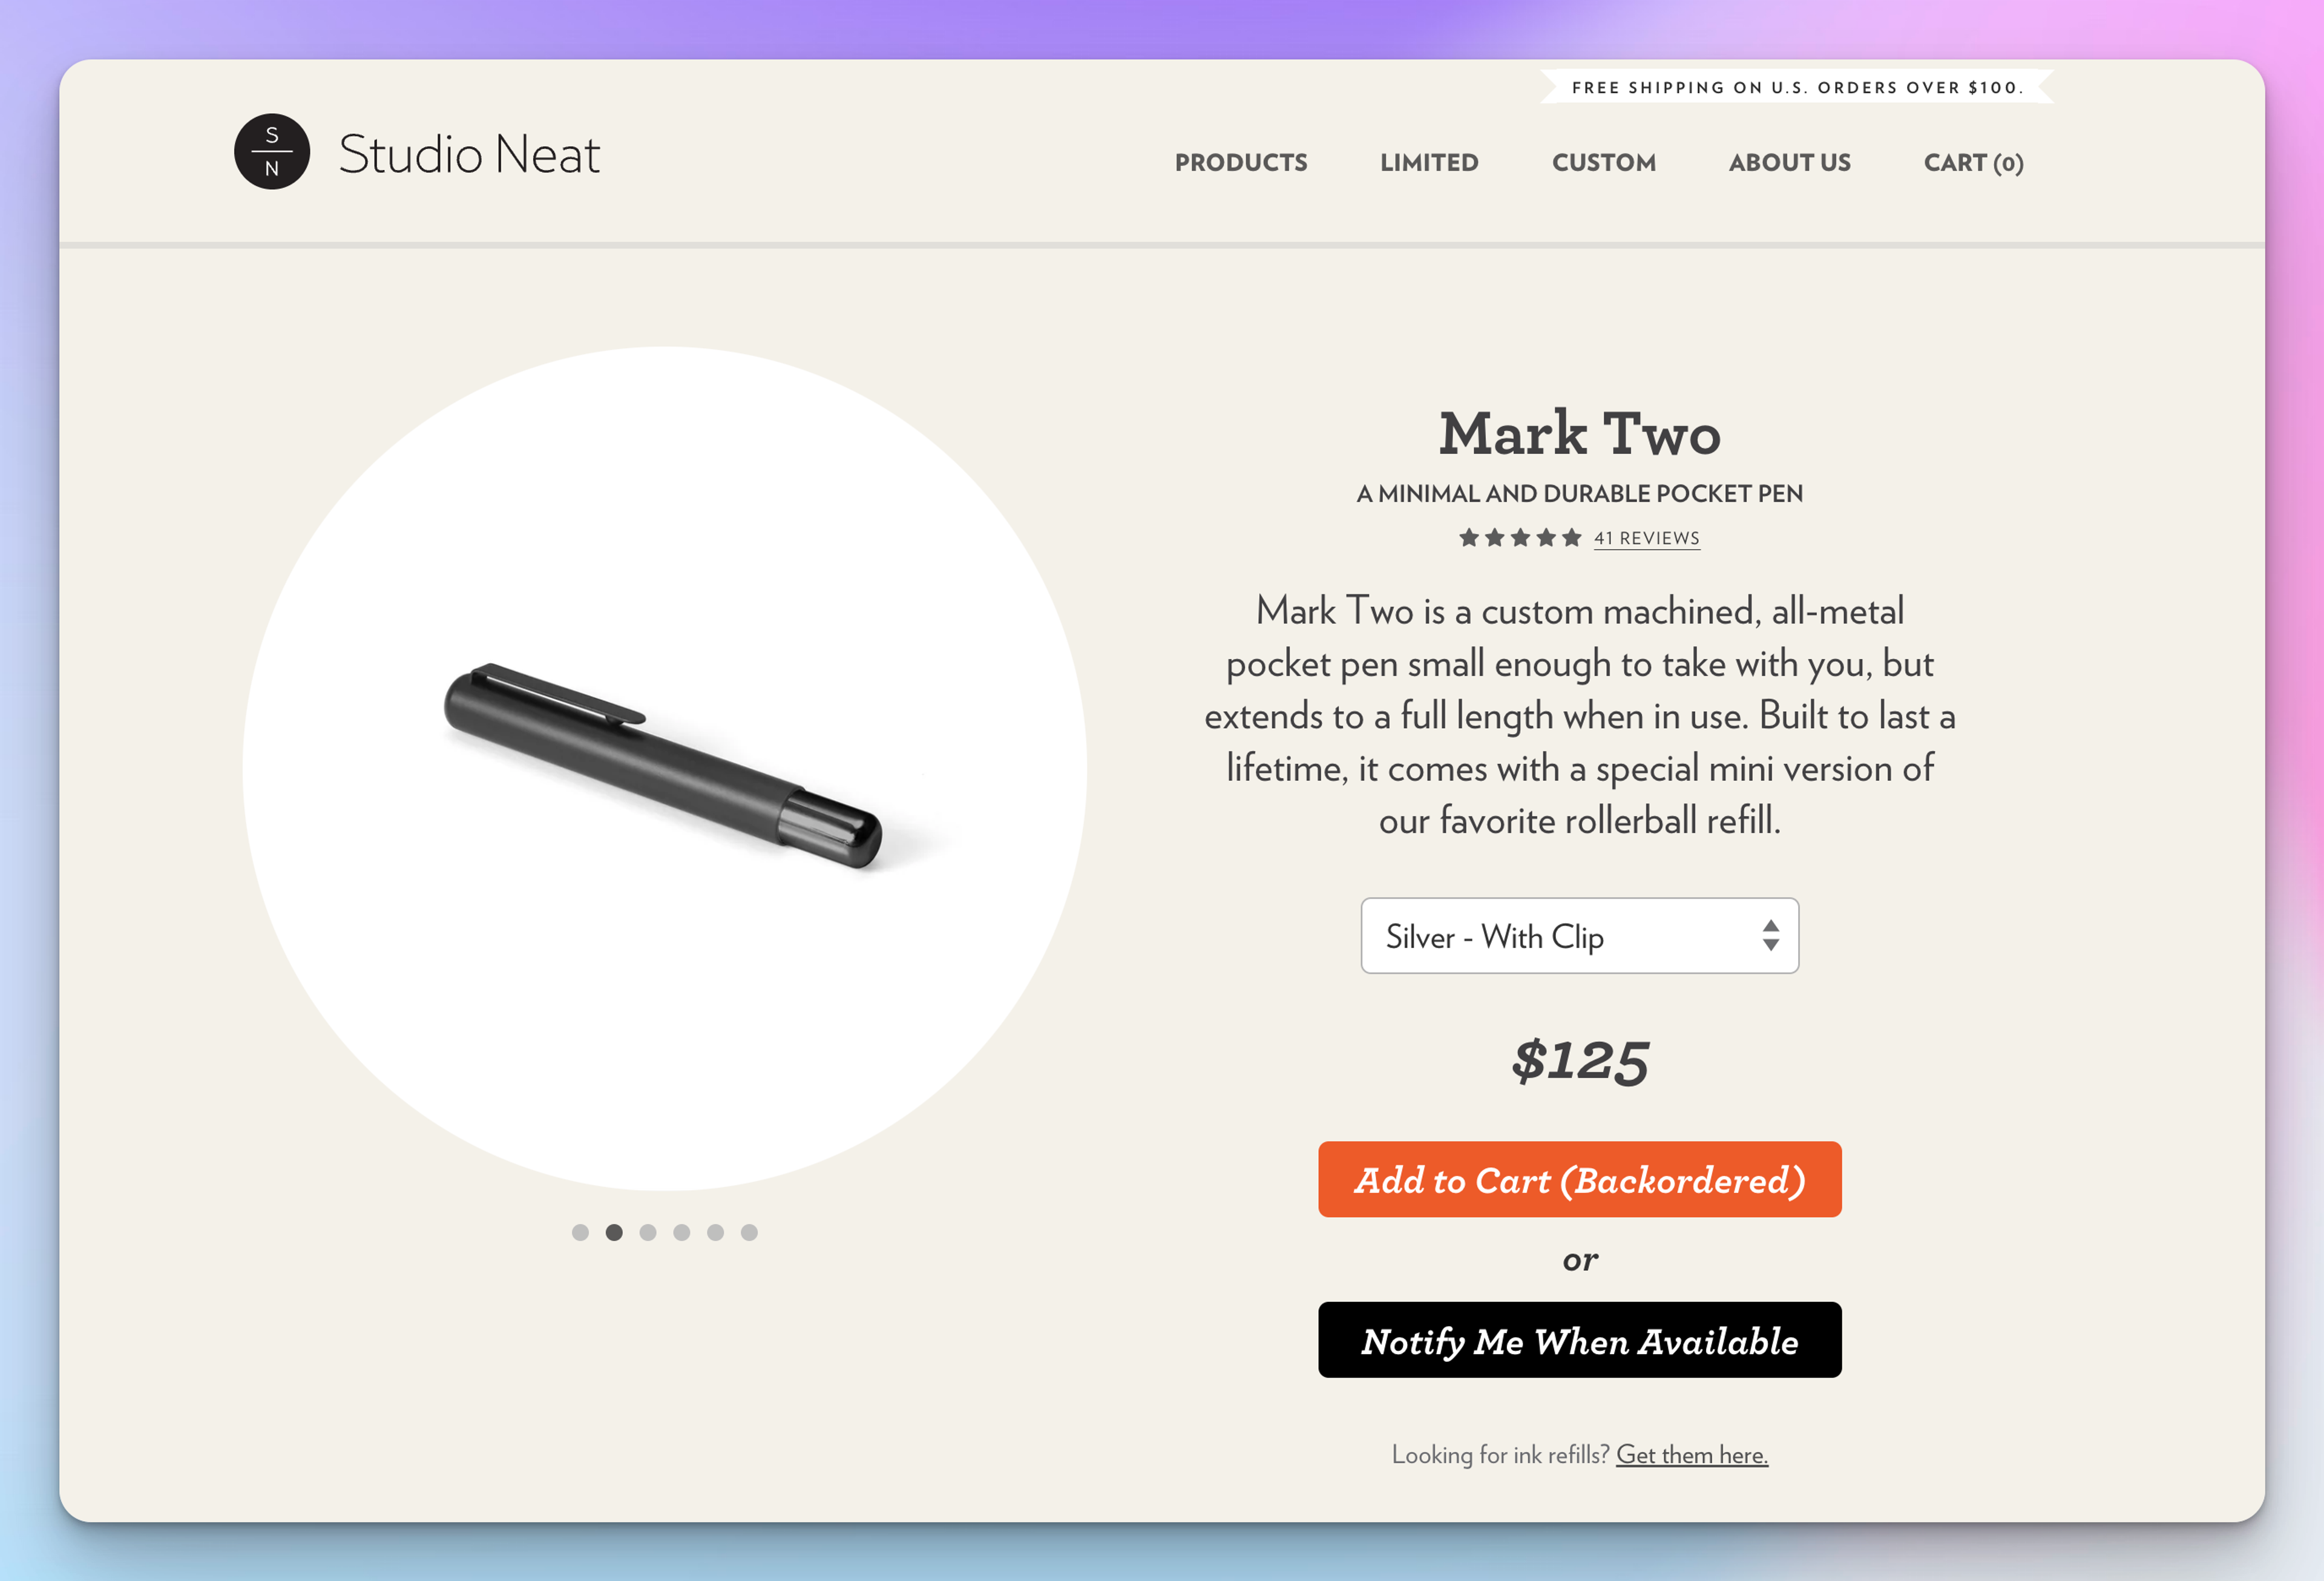 Studio Neat Shopify Product Page Example